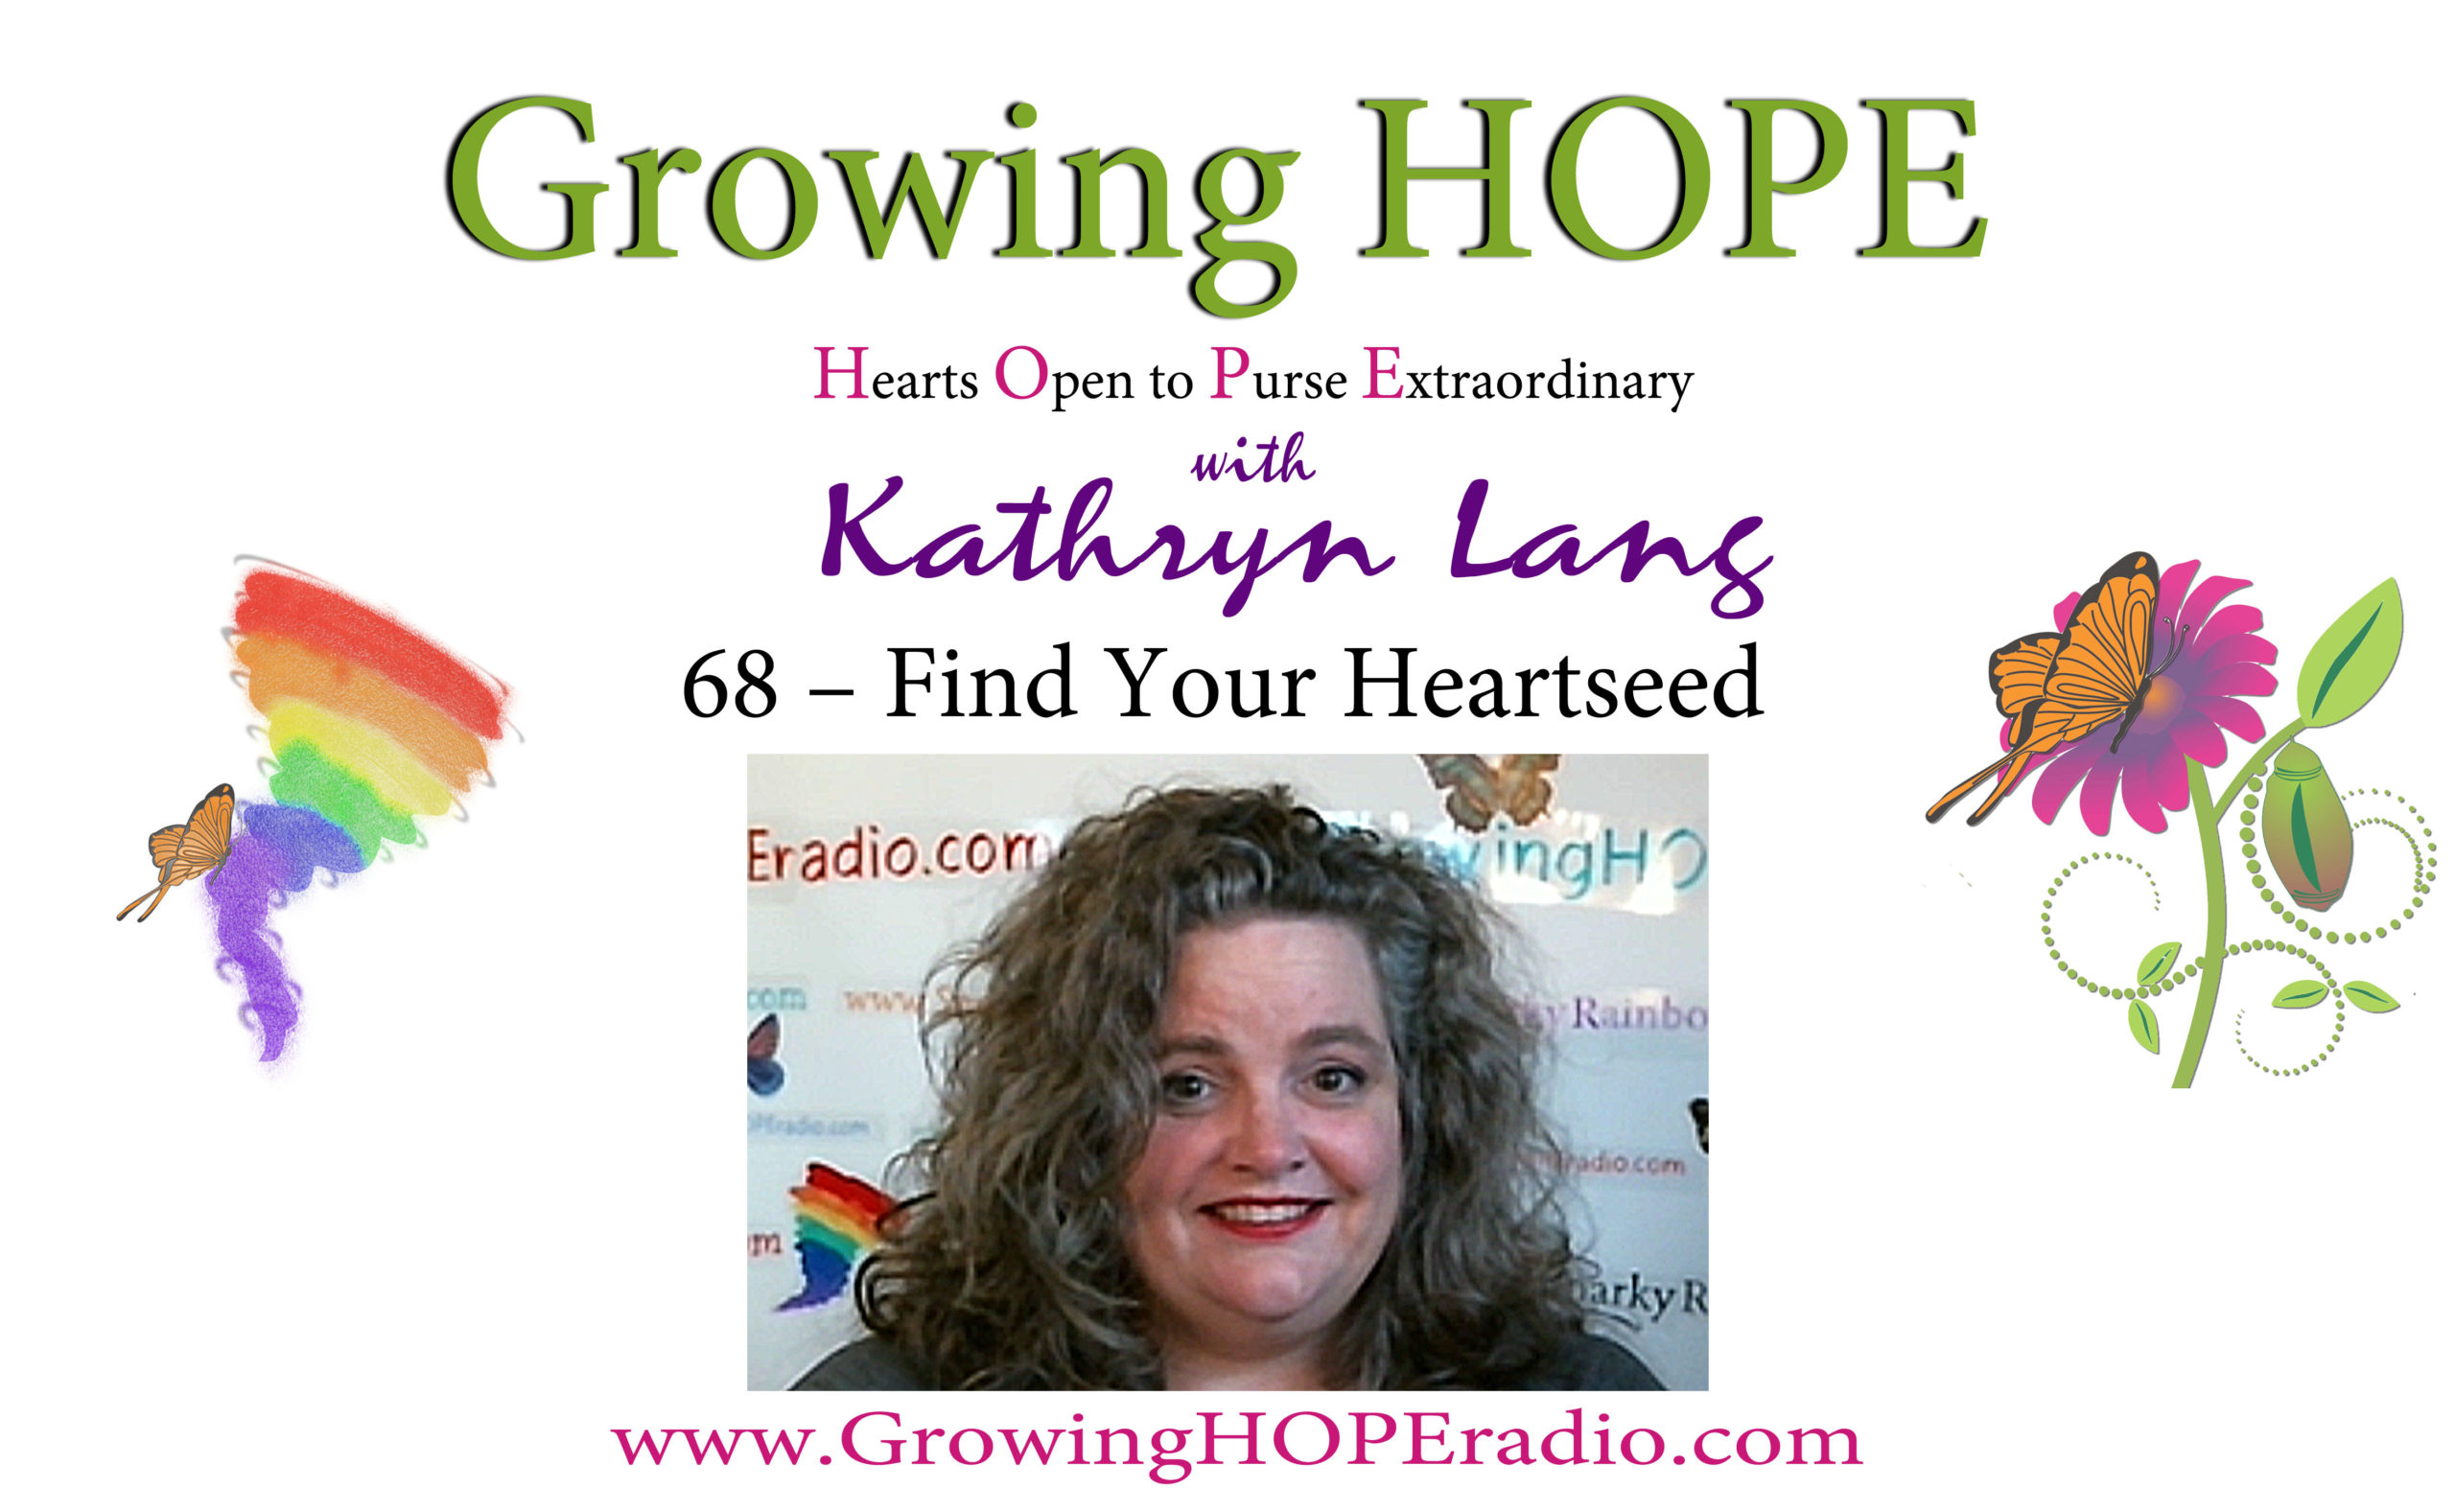 Growing HOPE Daily header - 68 - find your heartseed